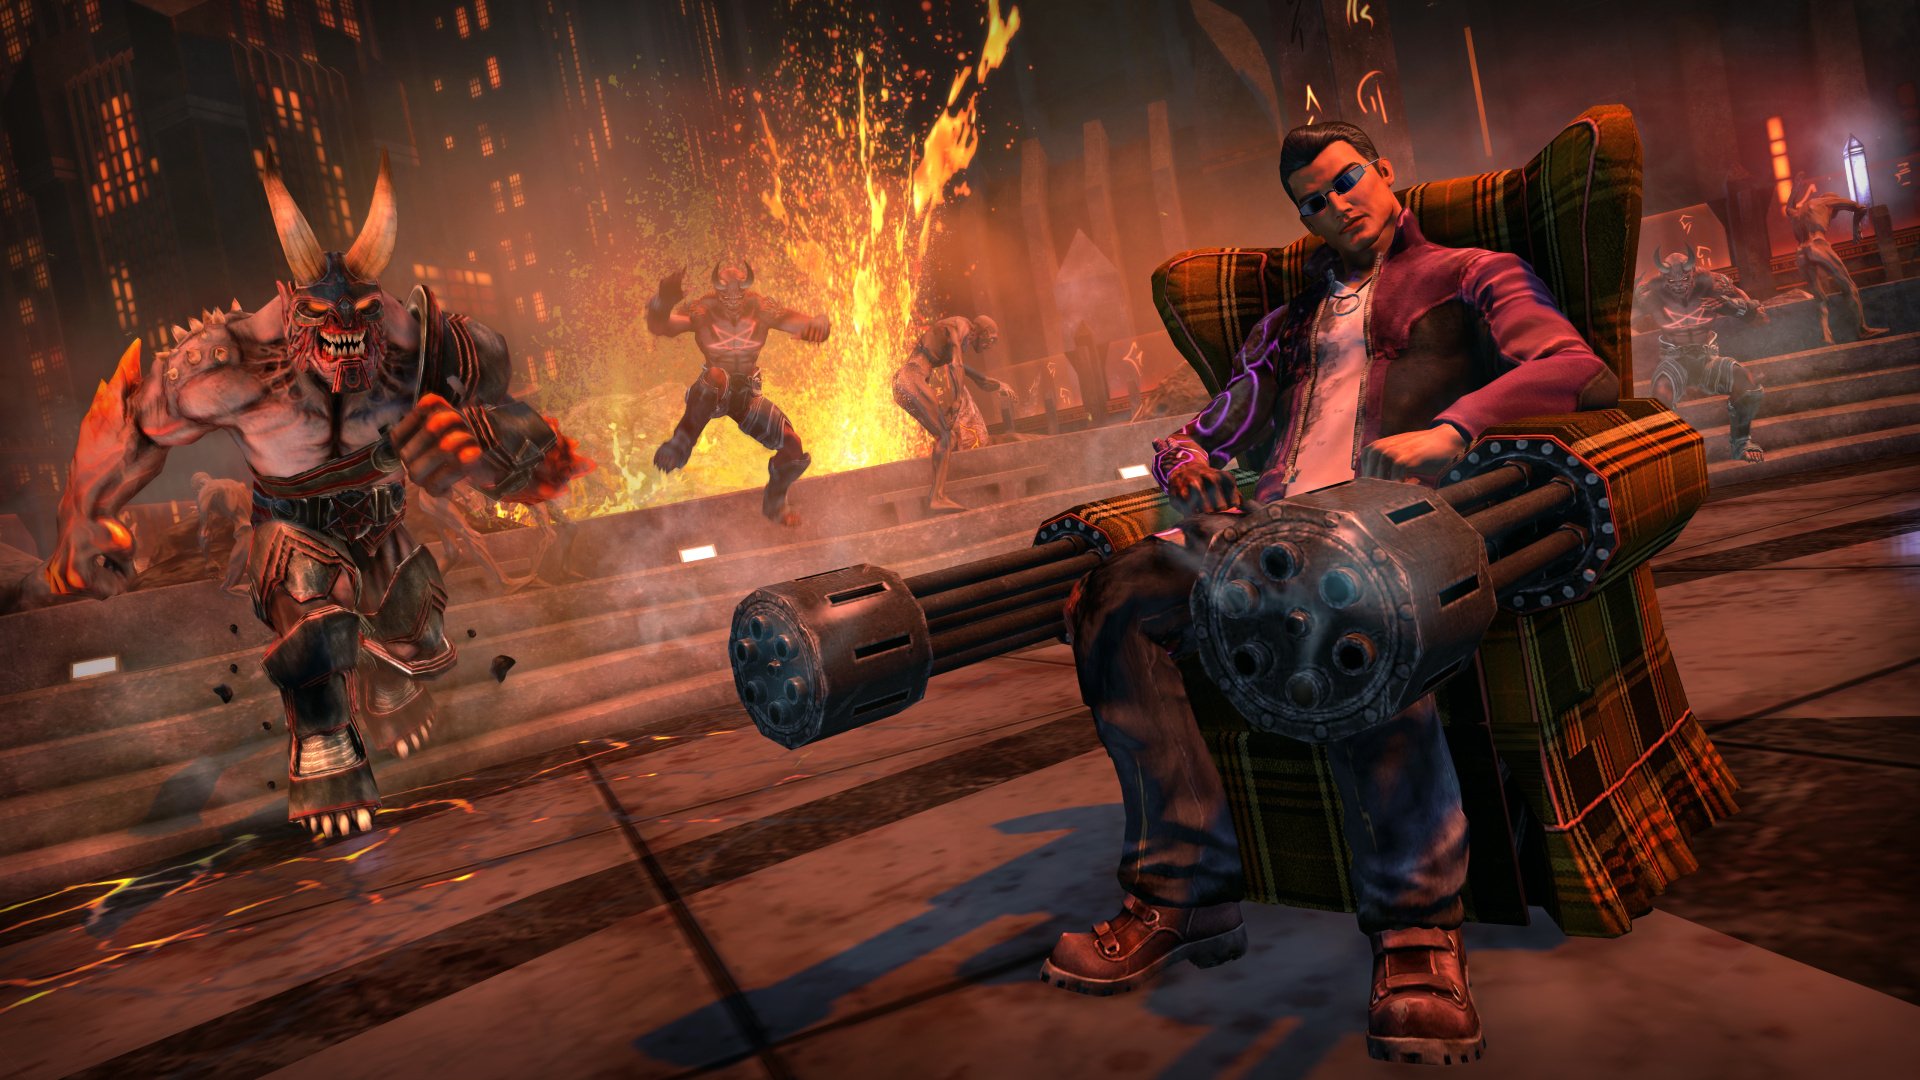 Saints Row: Gat Out of Hell (PS3 / PlayStation 3) Game Profile | News